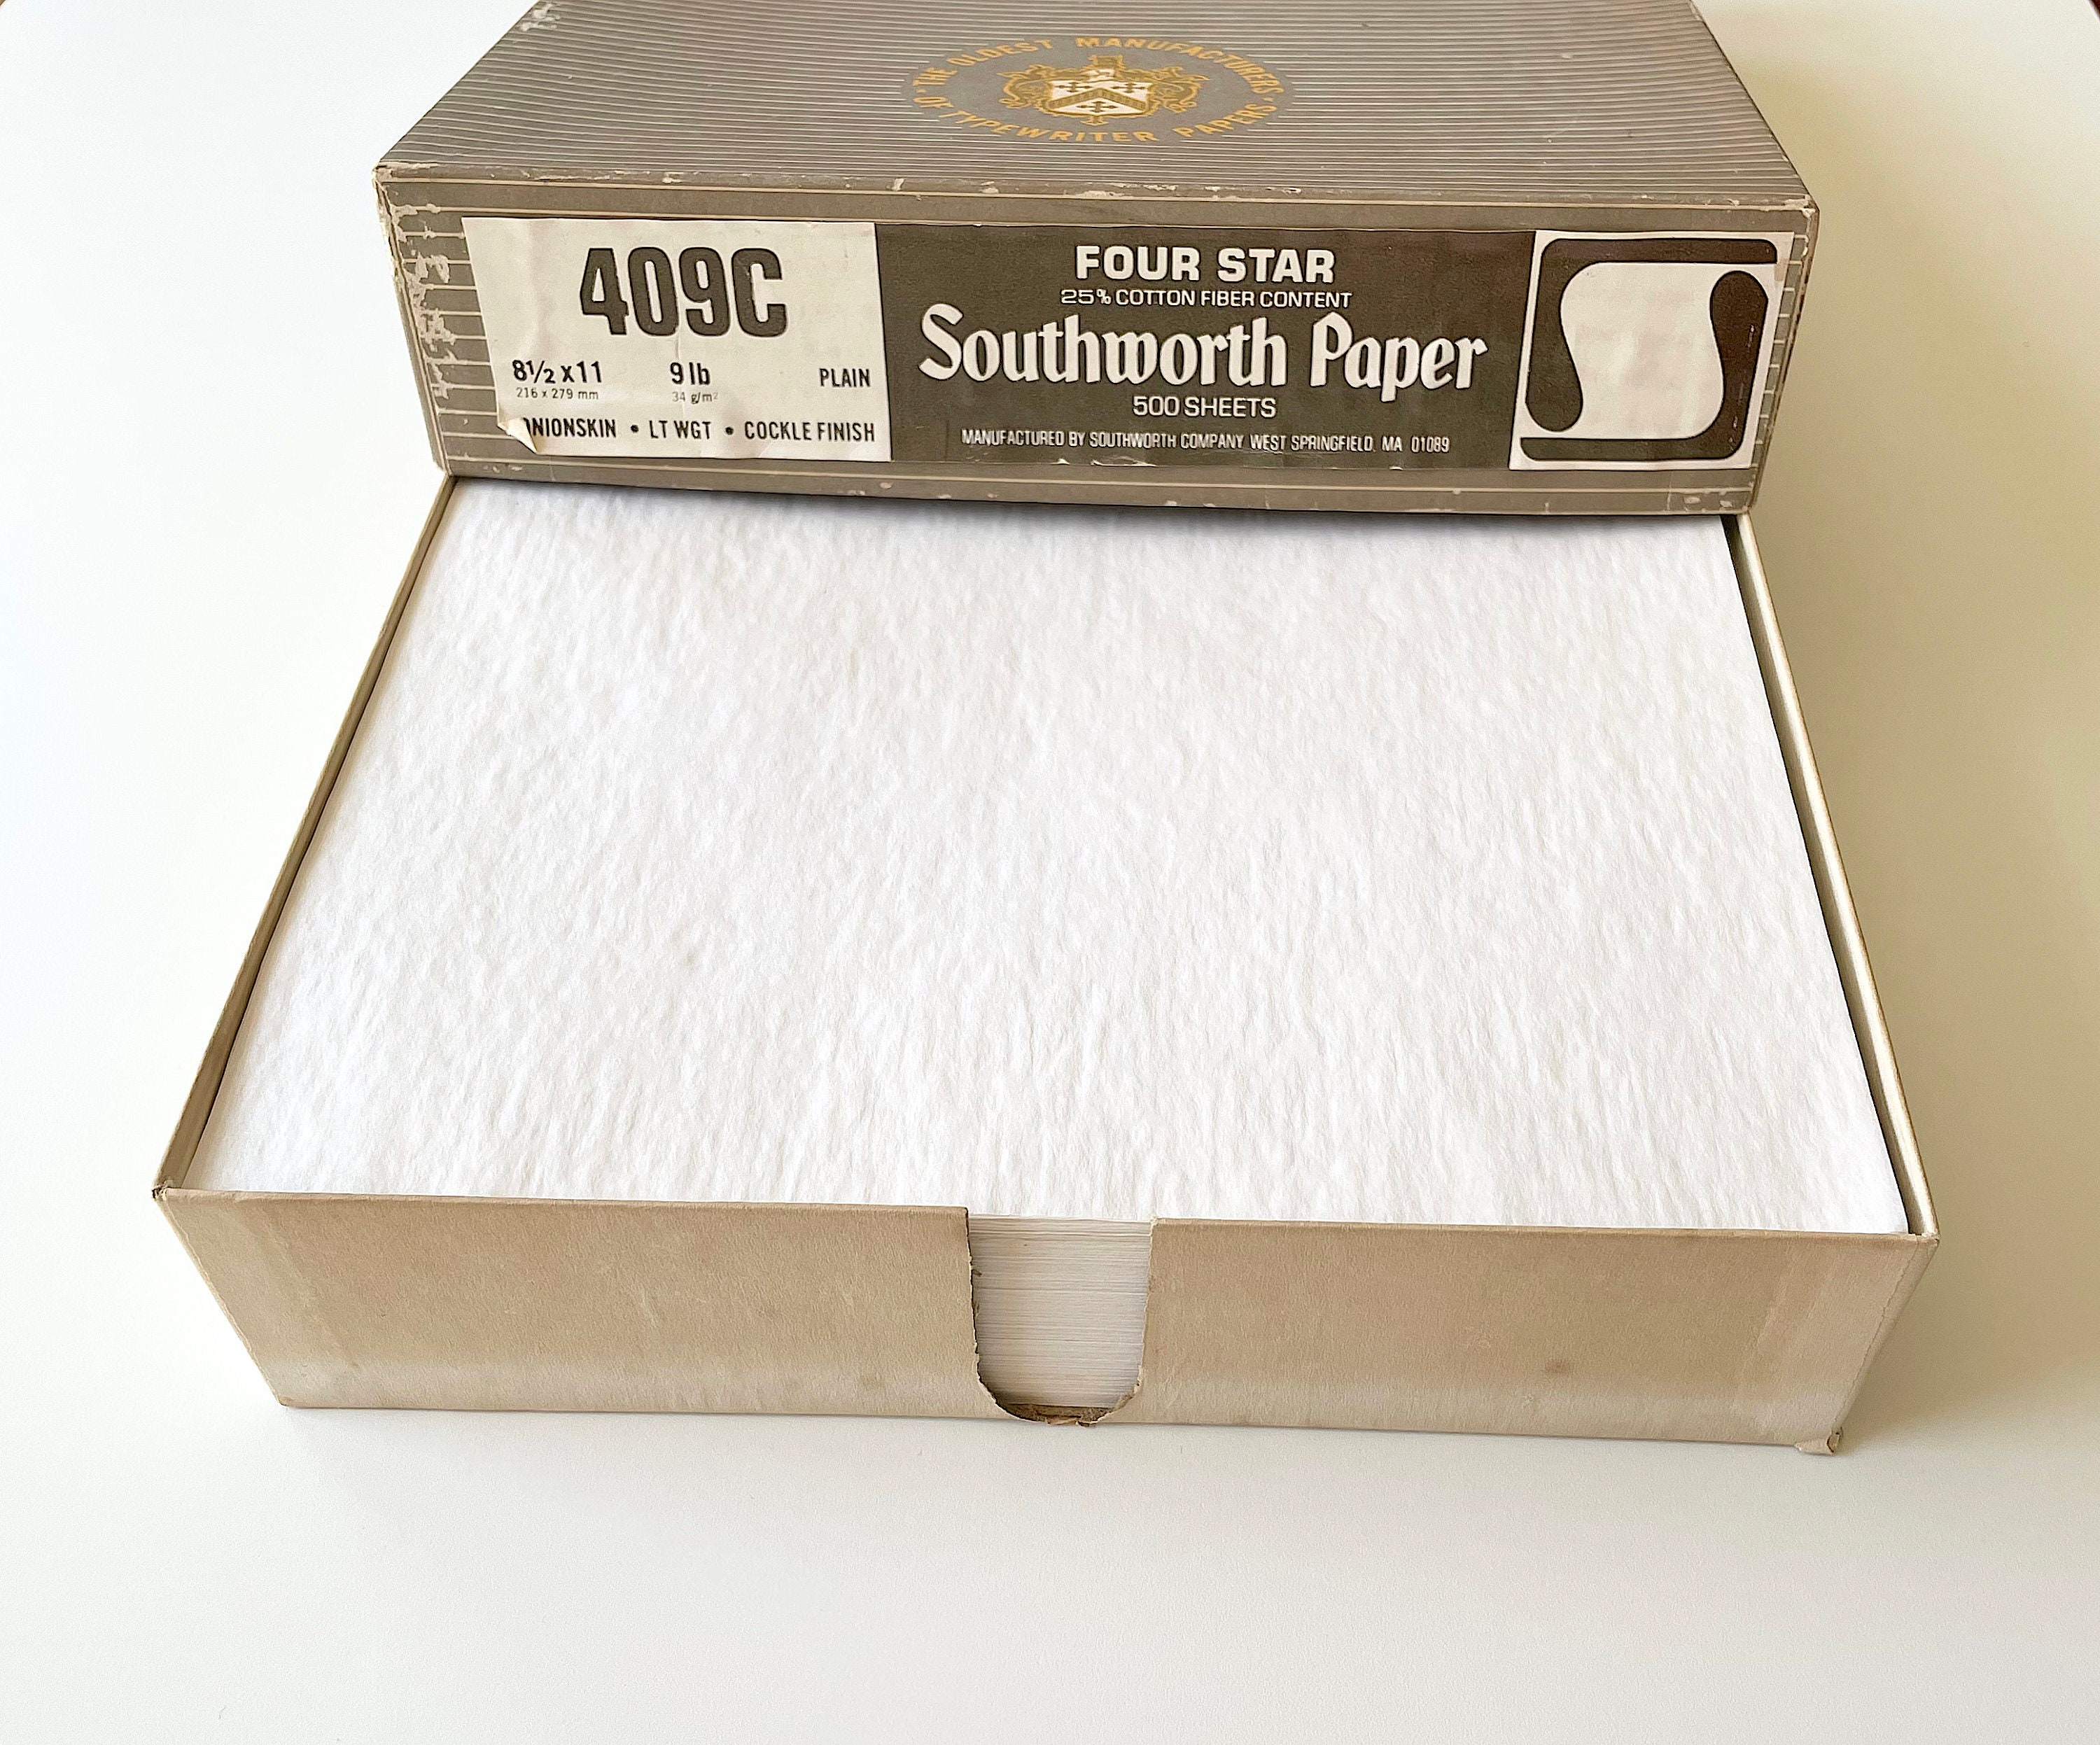 Gourmet Pens: Review: @PaperMillStore Onion Skin Paper